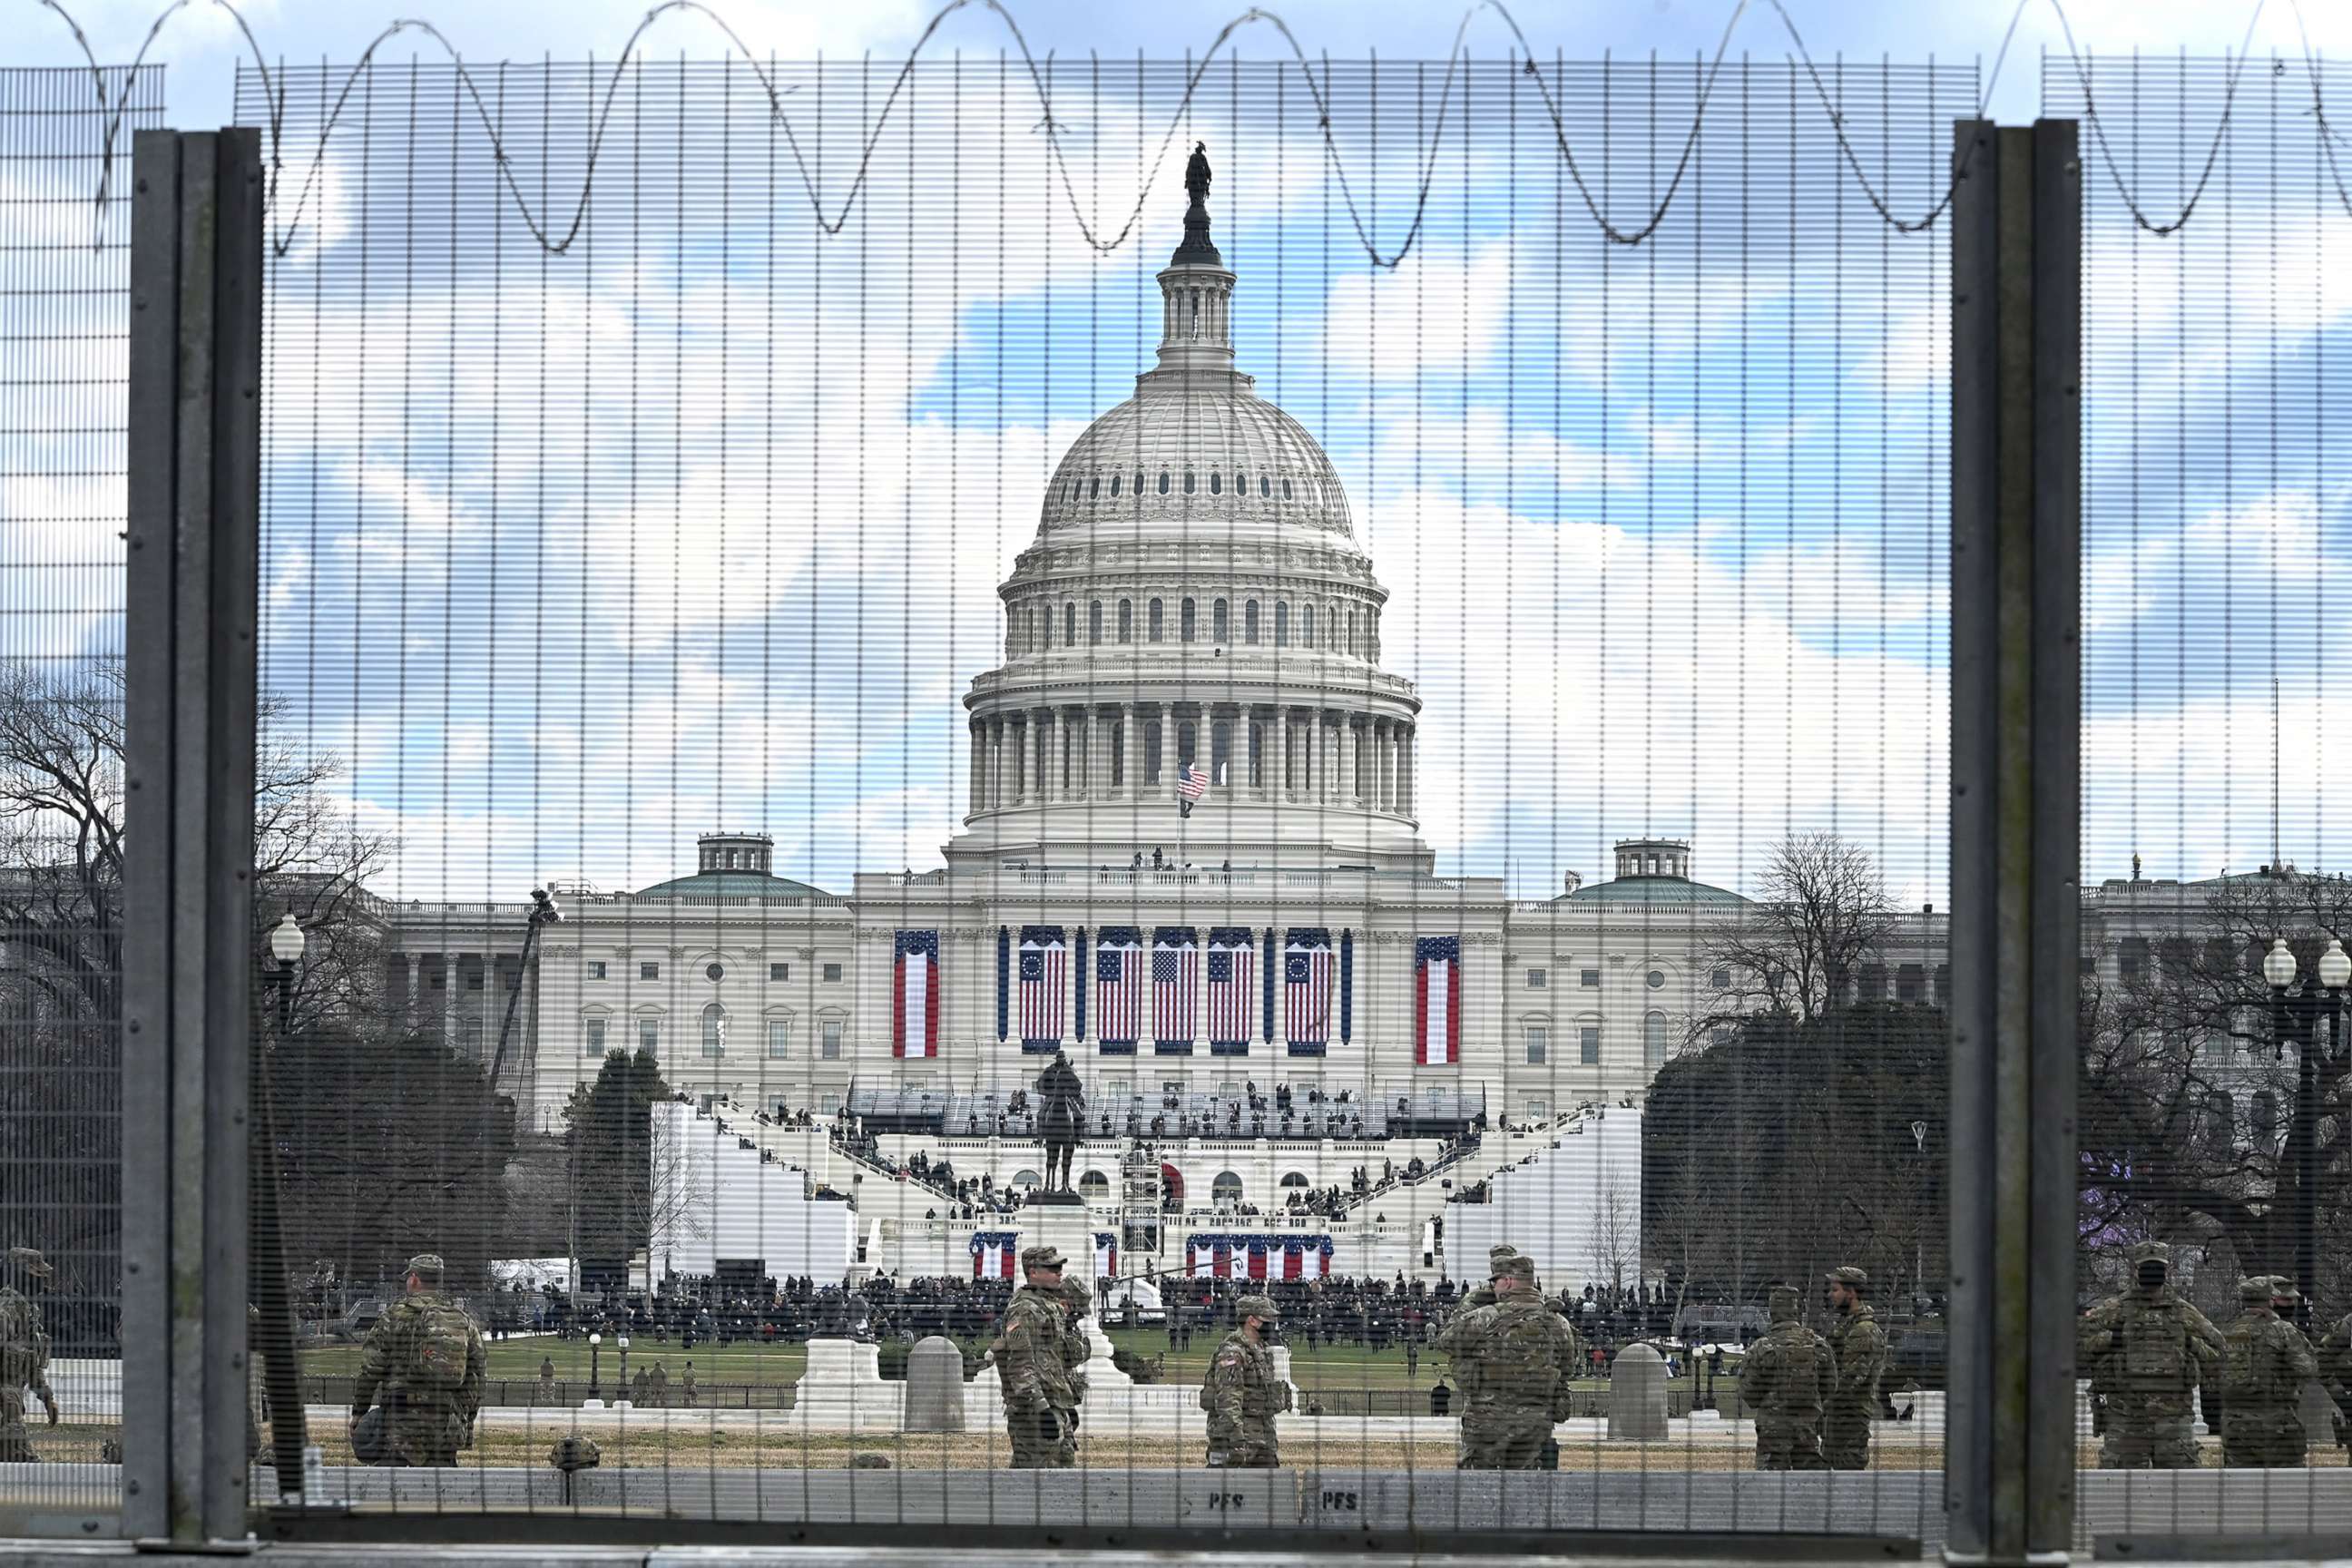 PHOTO: Heightened security is seen in front of the United States Capitol on the morning of Joe Biden's Inauguration as the 46th President of the United States, Jan. 20, 2021 in Washington. The mall was closed to the general public due to safety concerns.